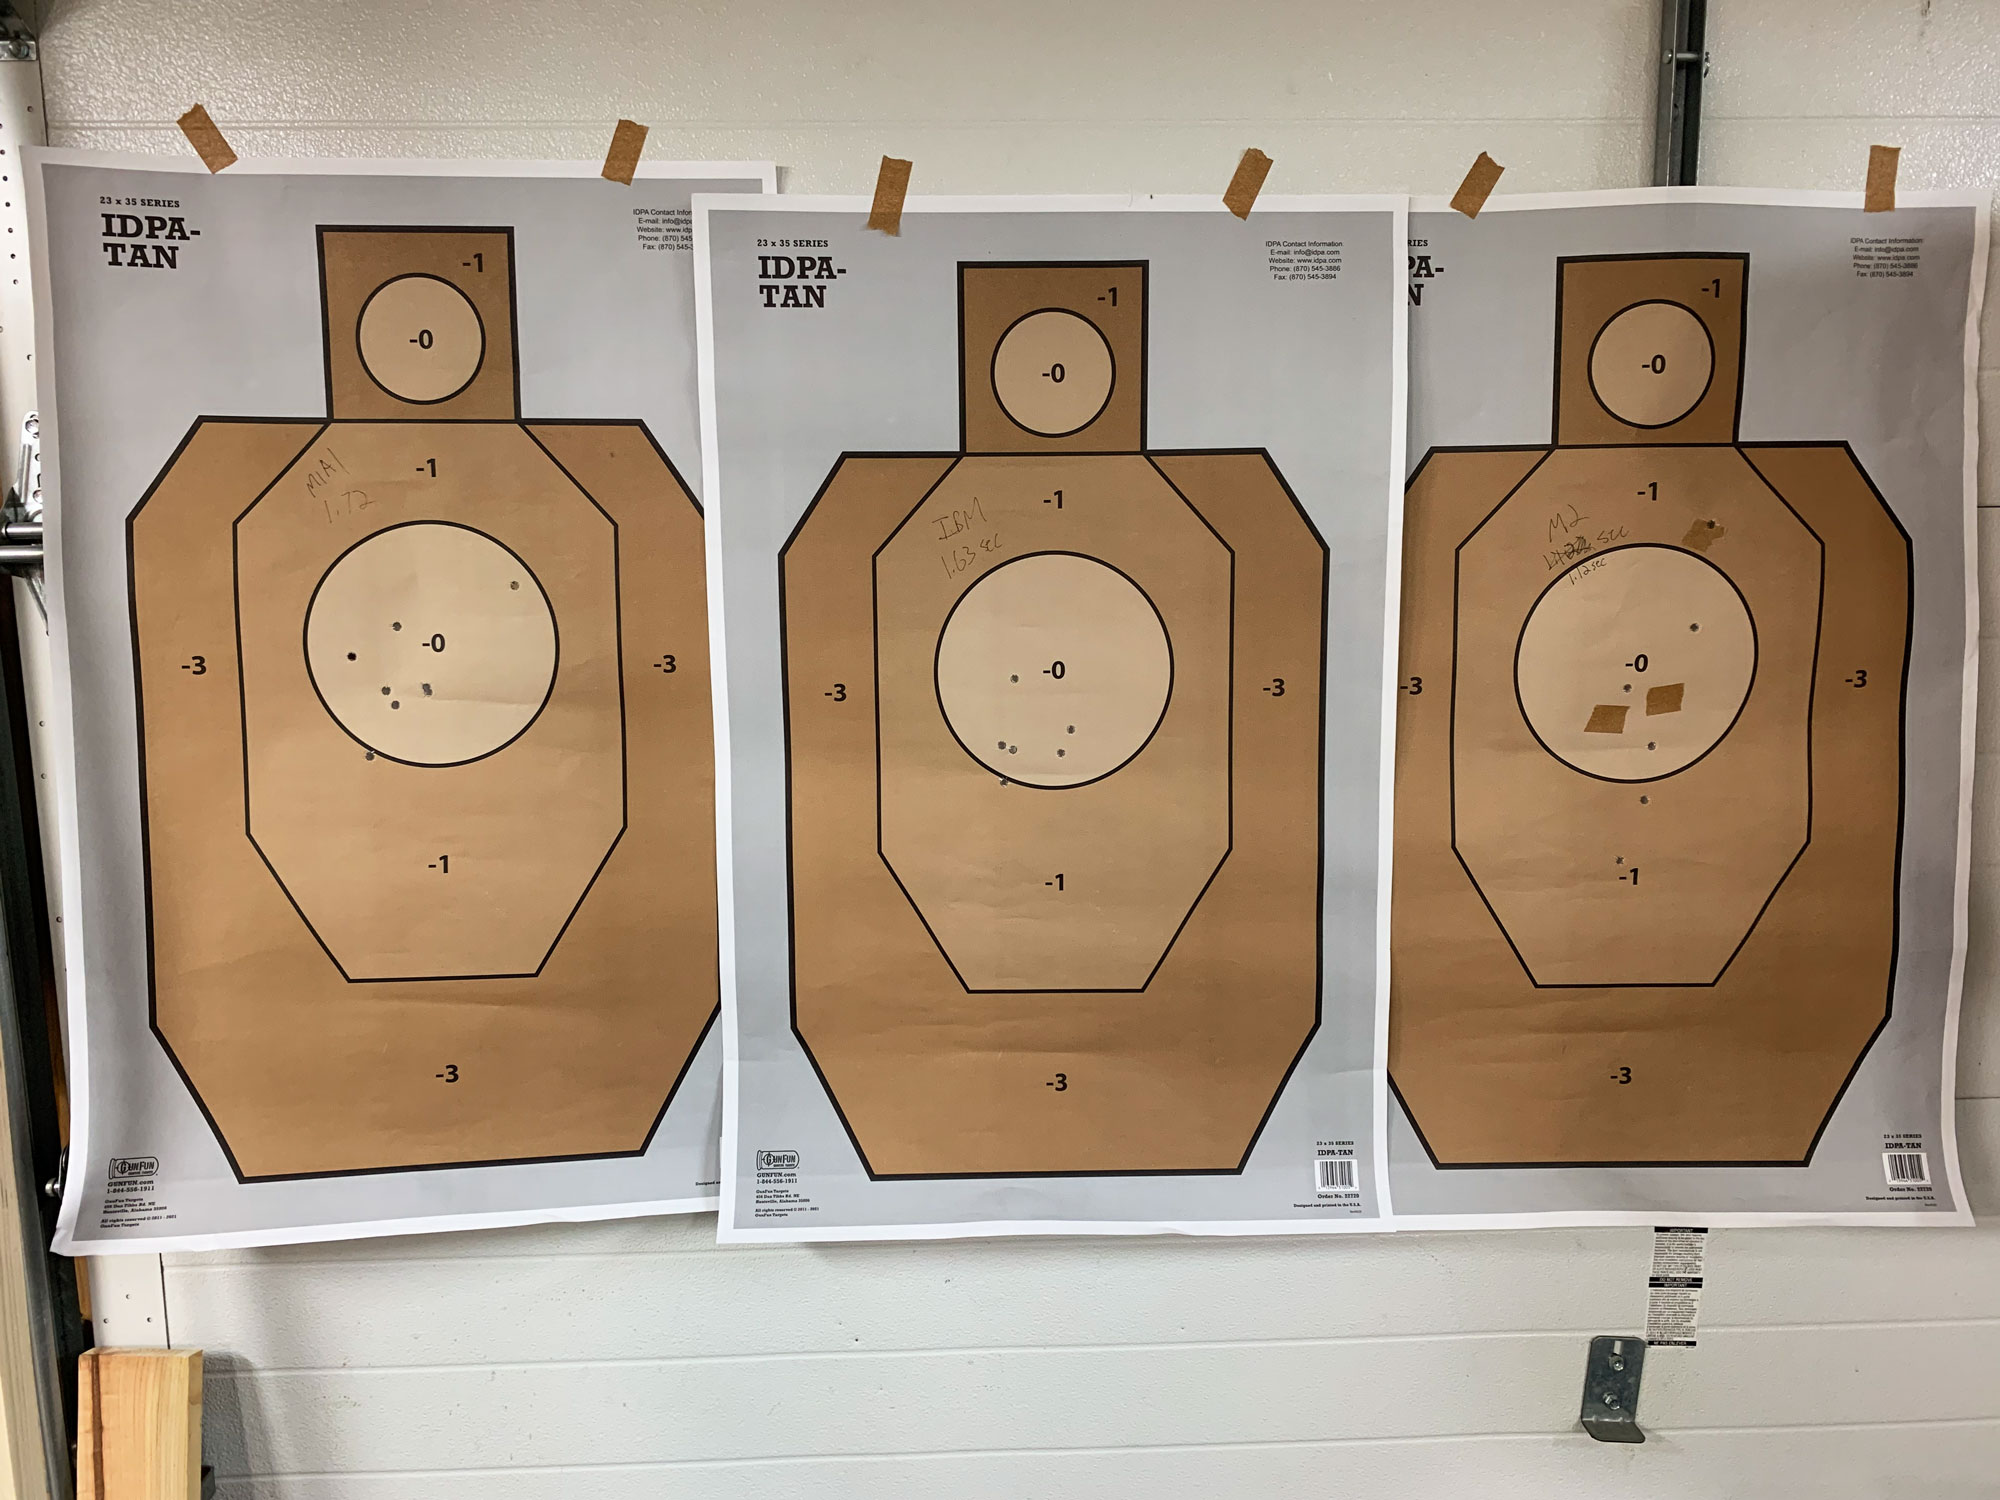 Bill Drill targets with M1, M1A1, and M2 carbines